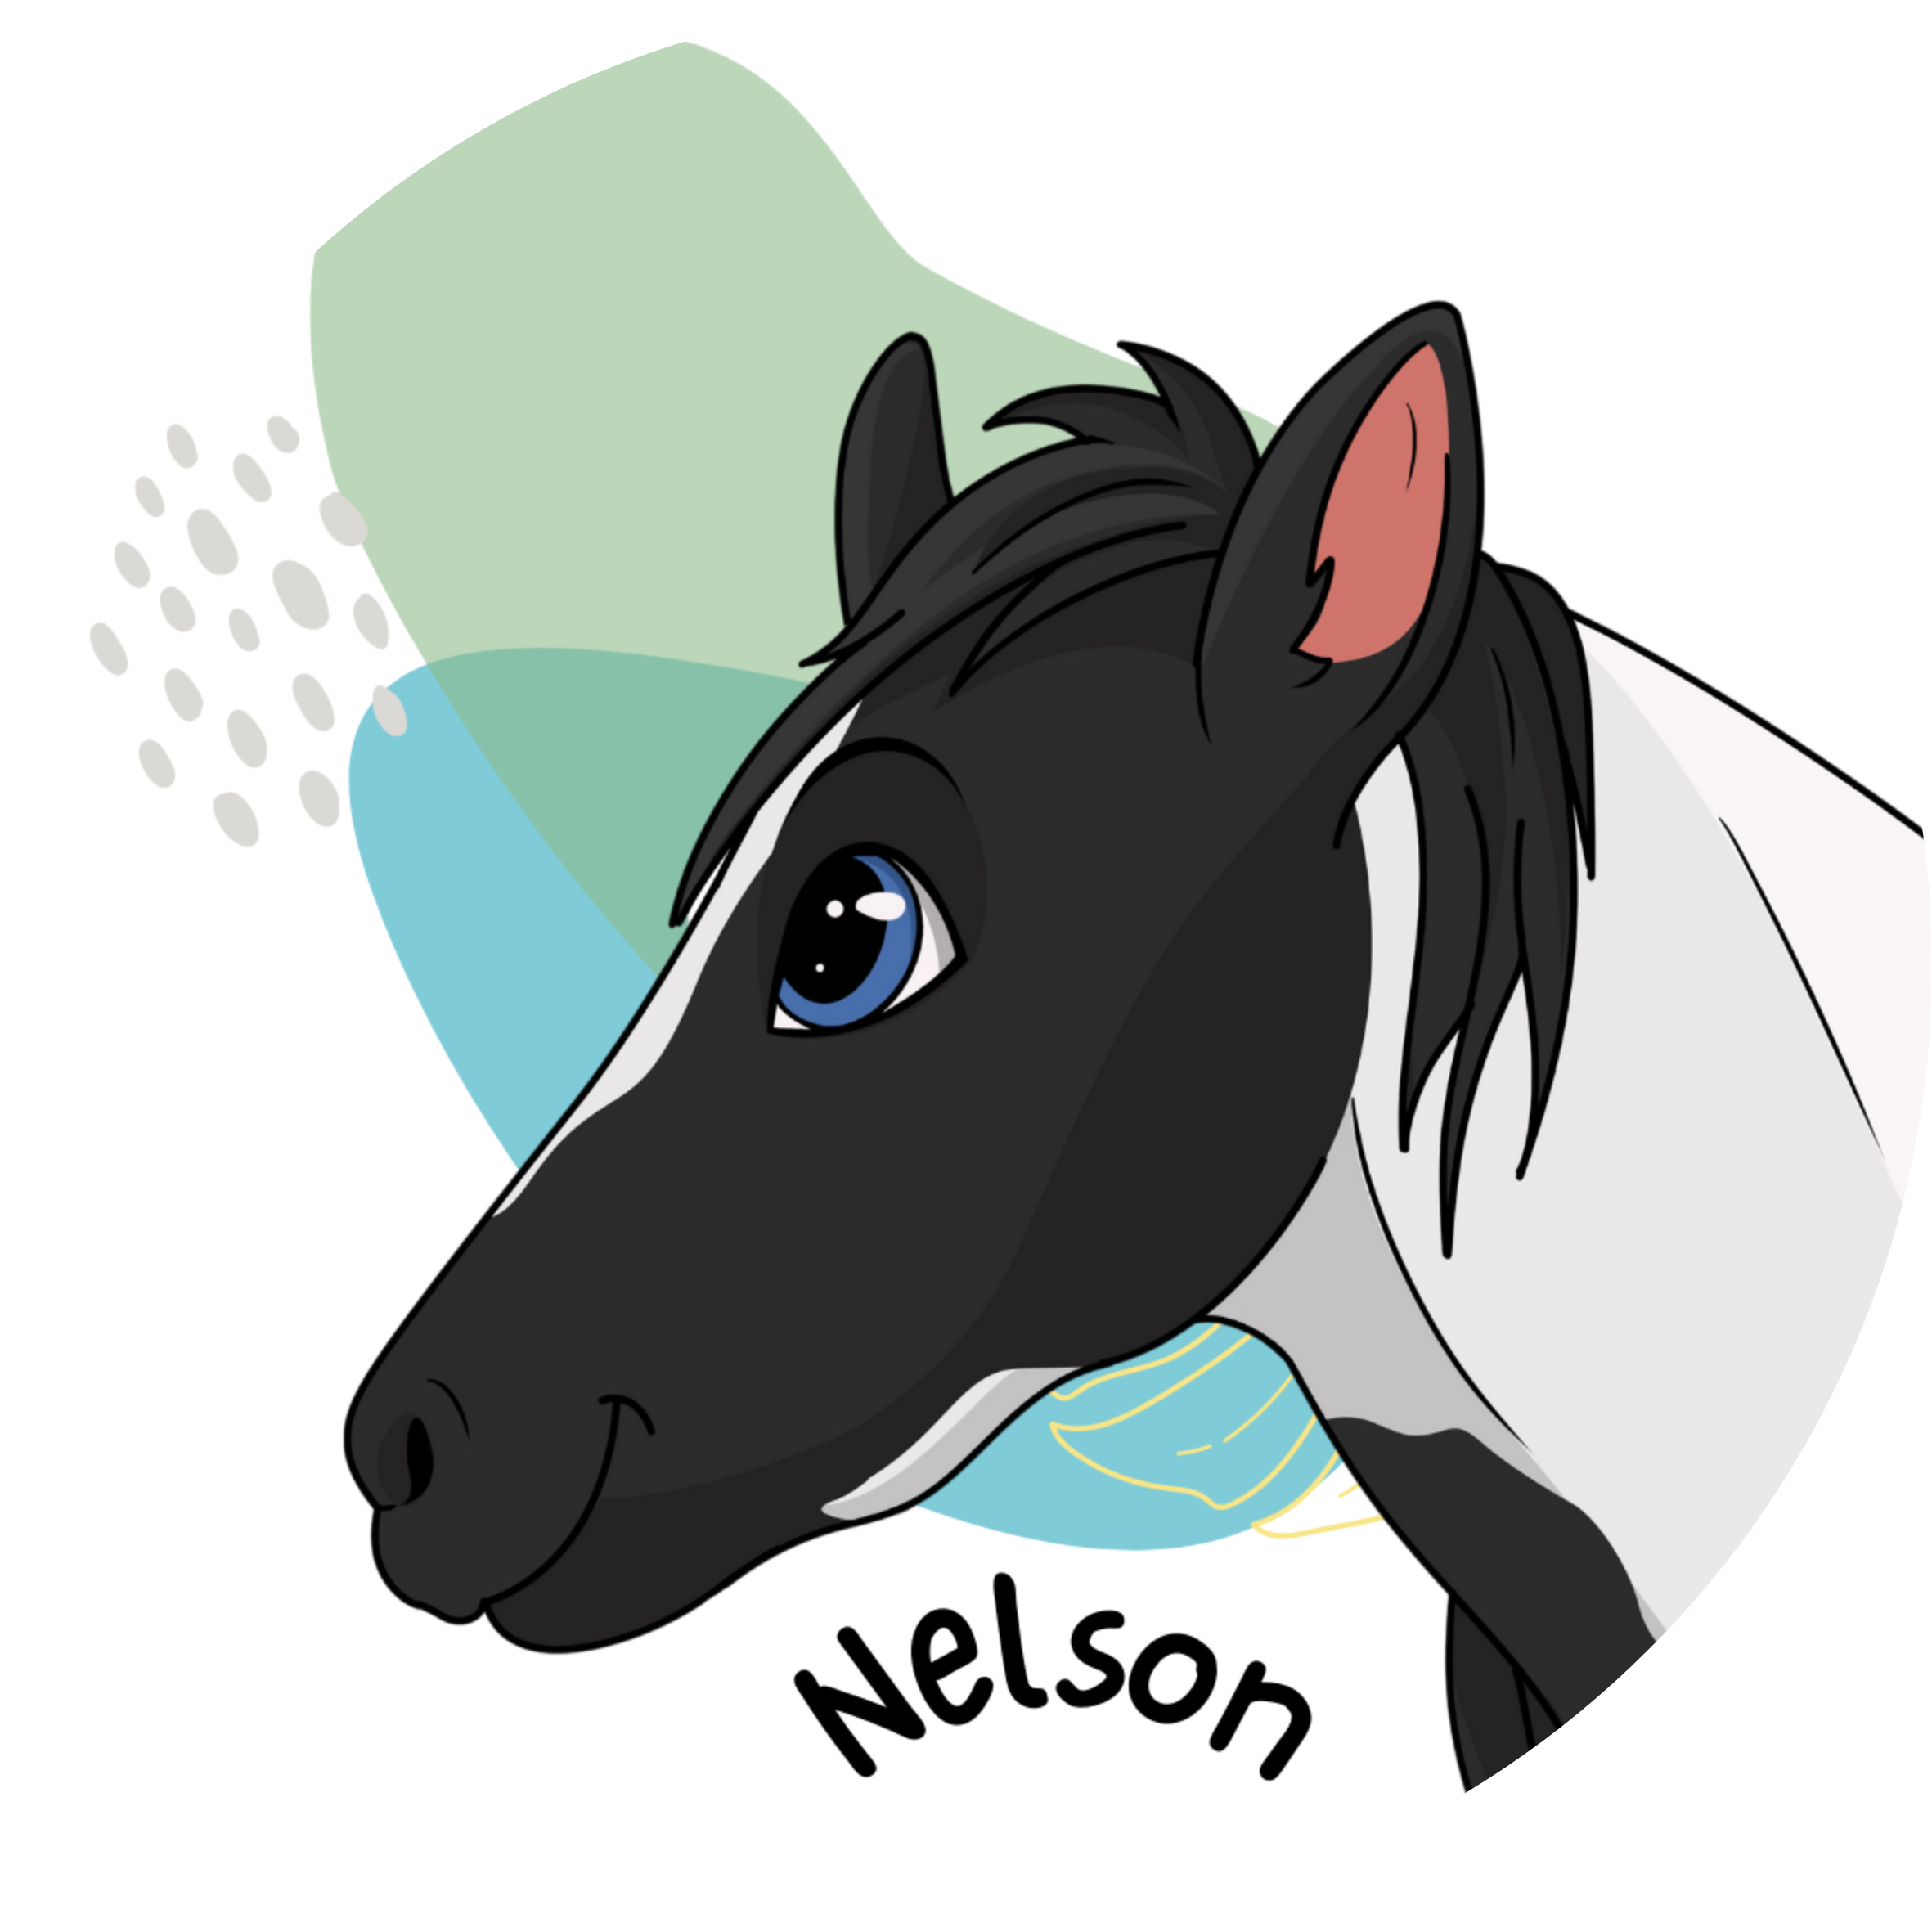 Nelson - Horse sticker .png large.png